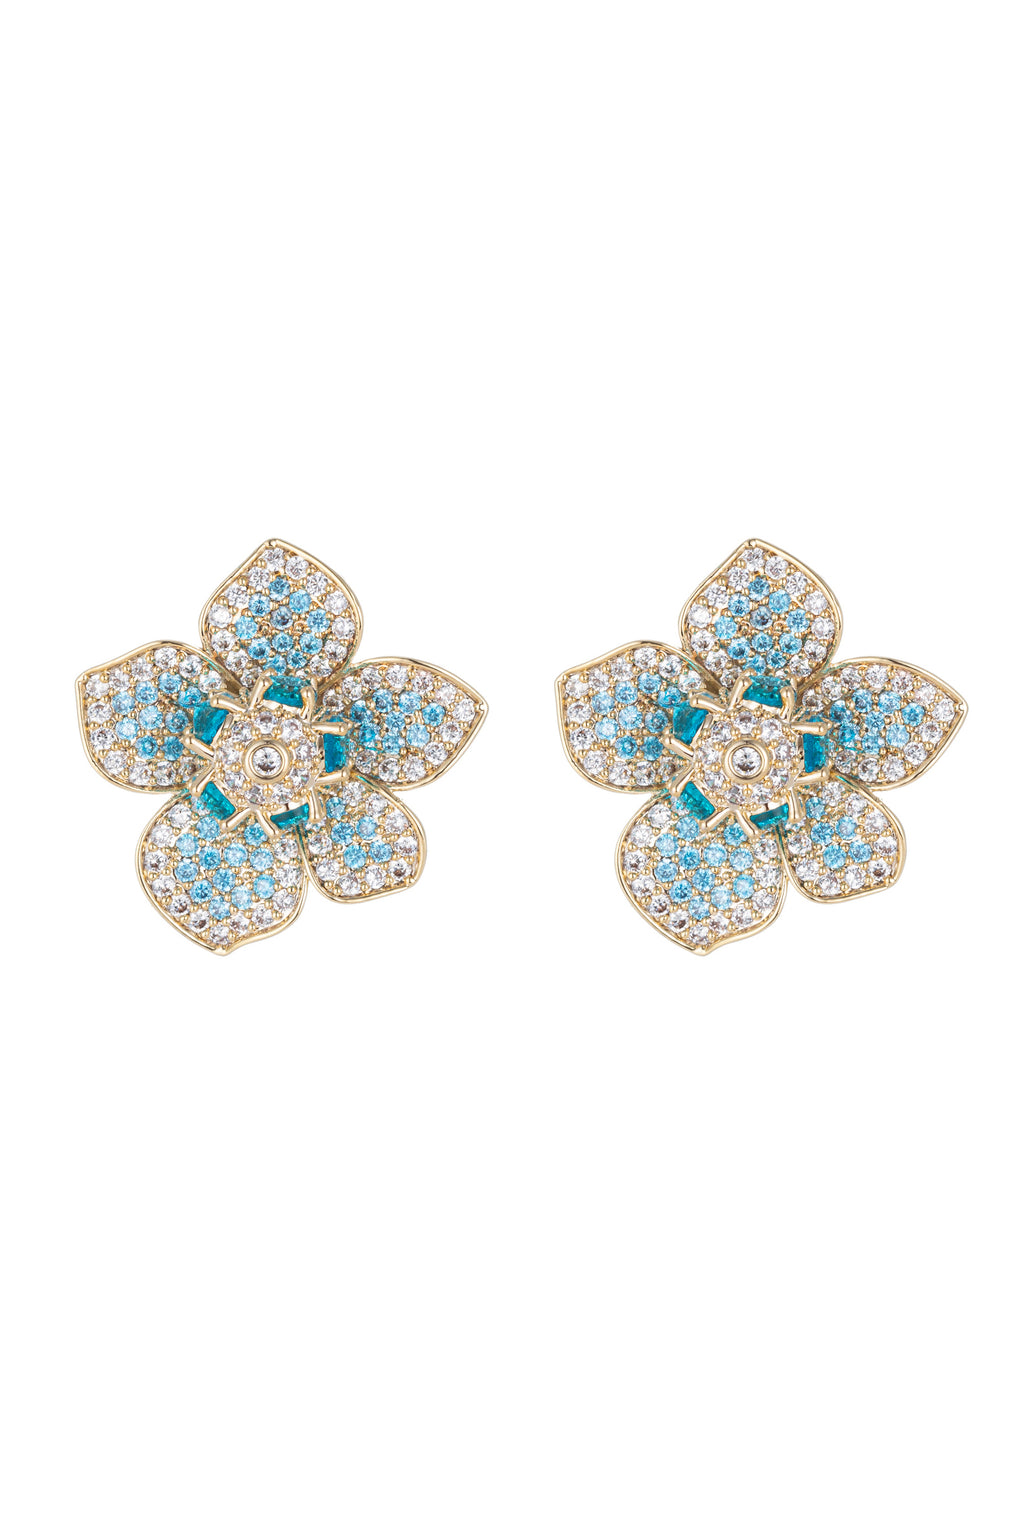 Blue gold flower petal earrings with CZ crystals.